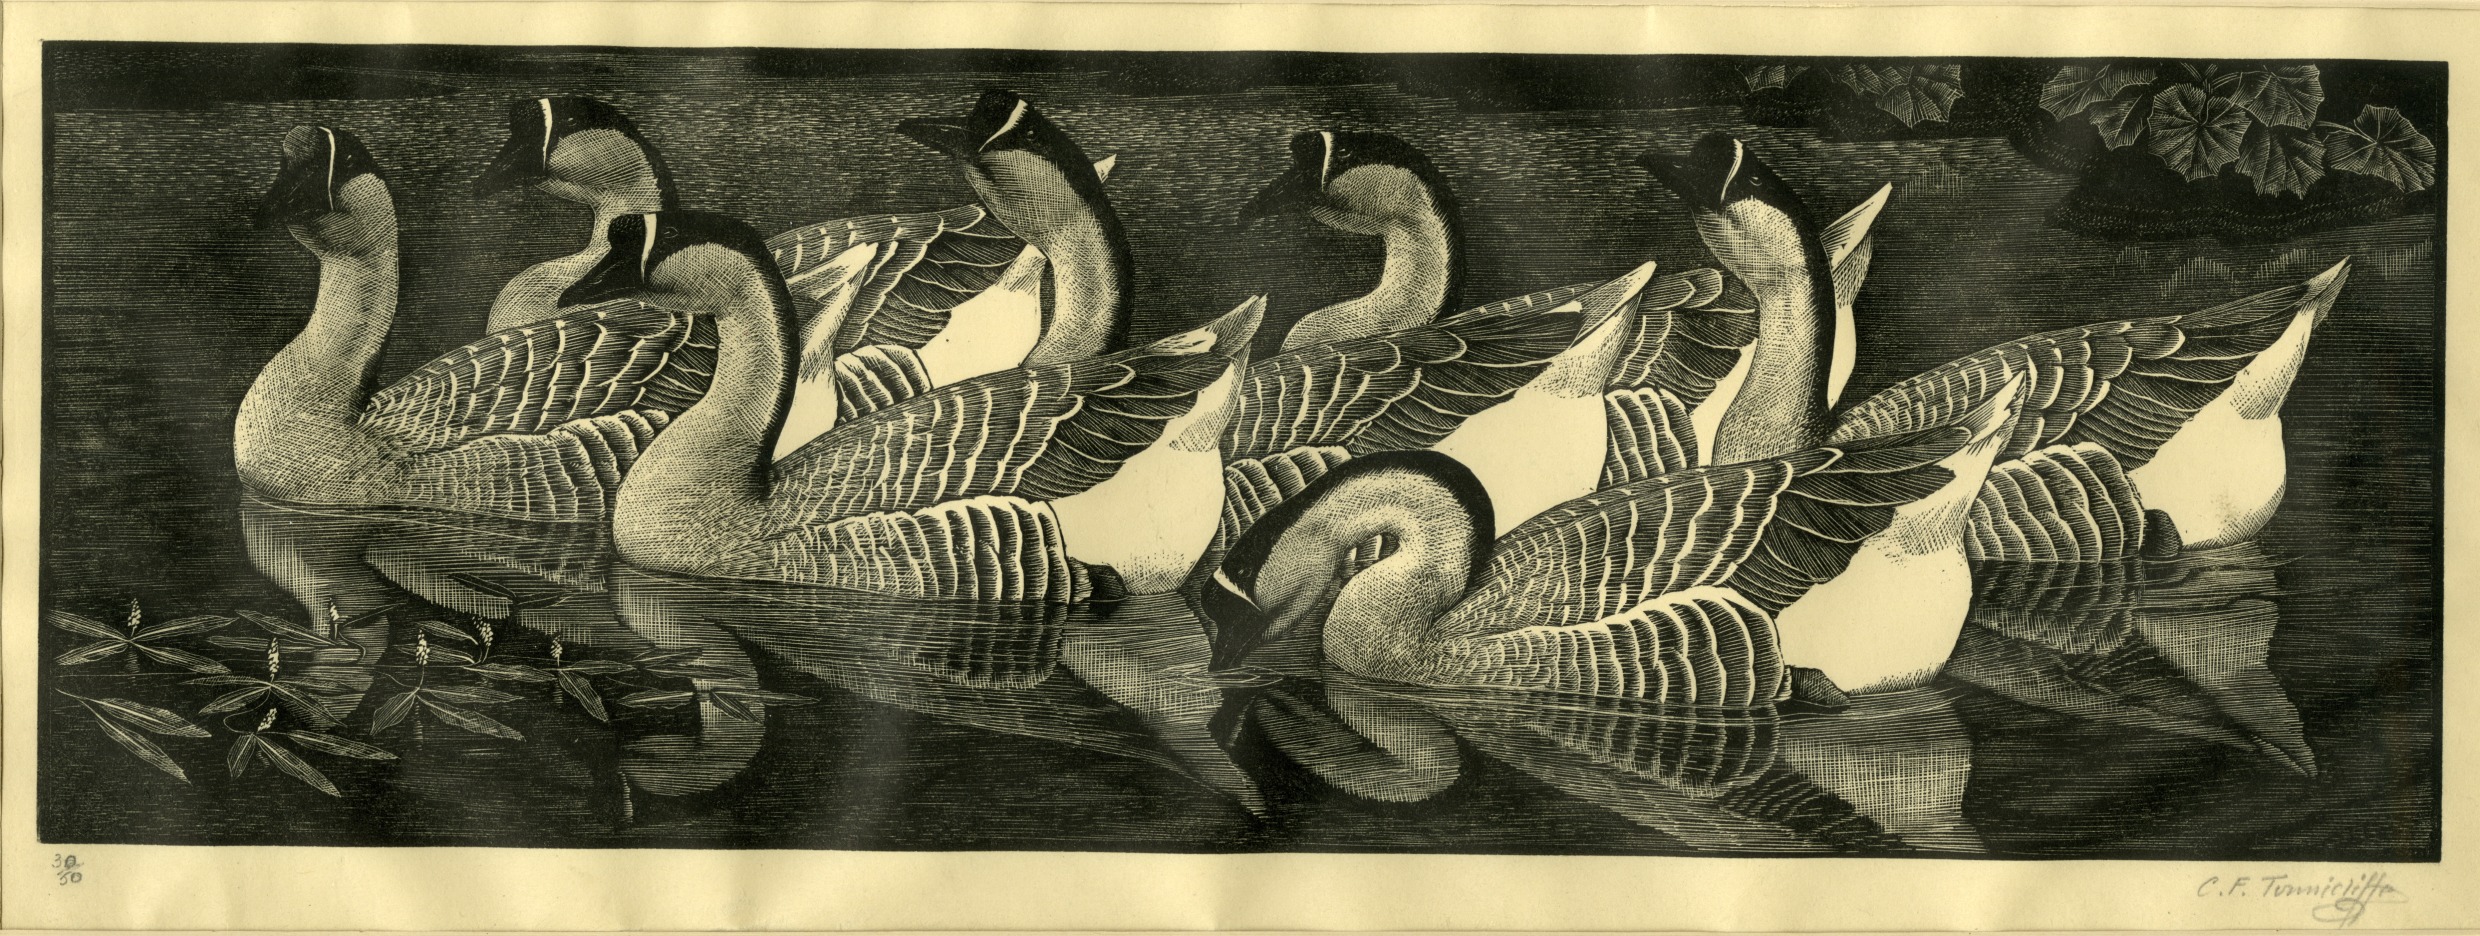 Chinese geese (1937)